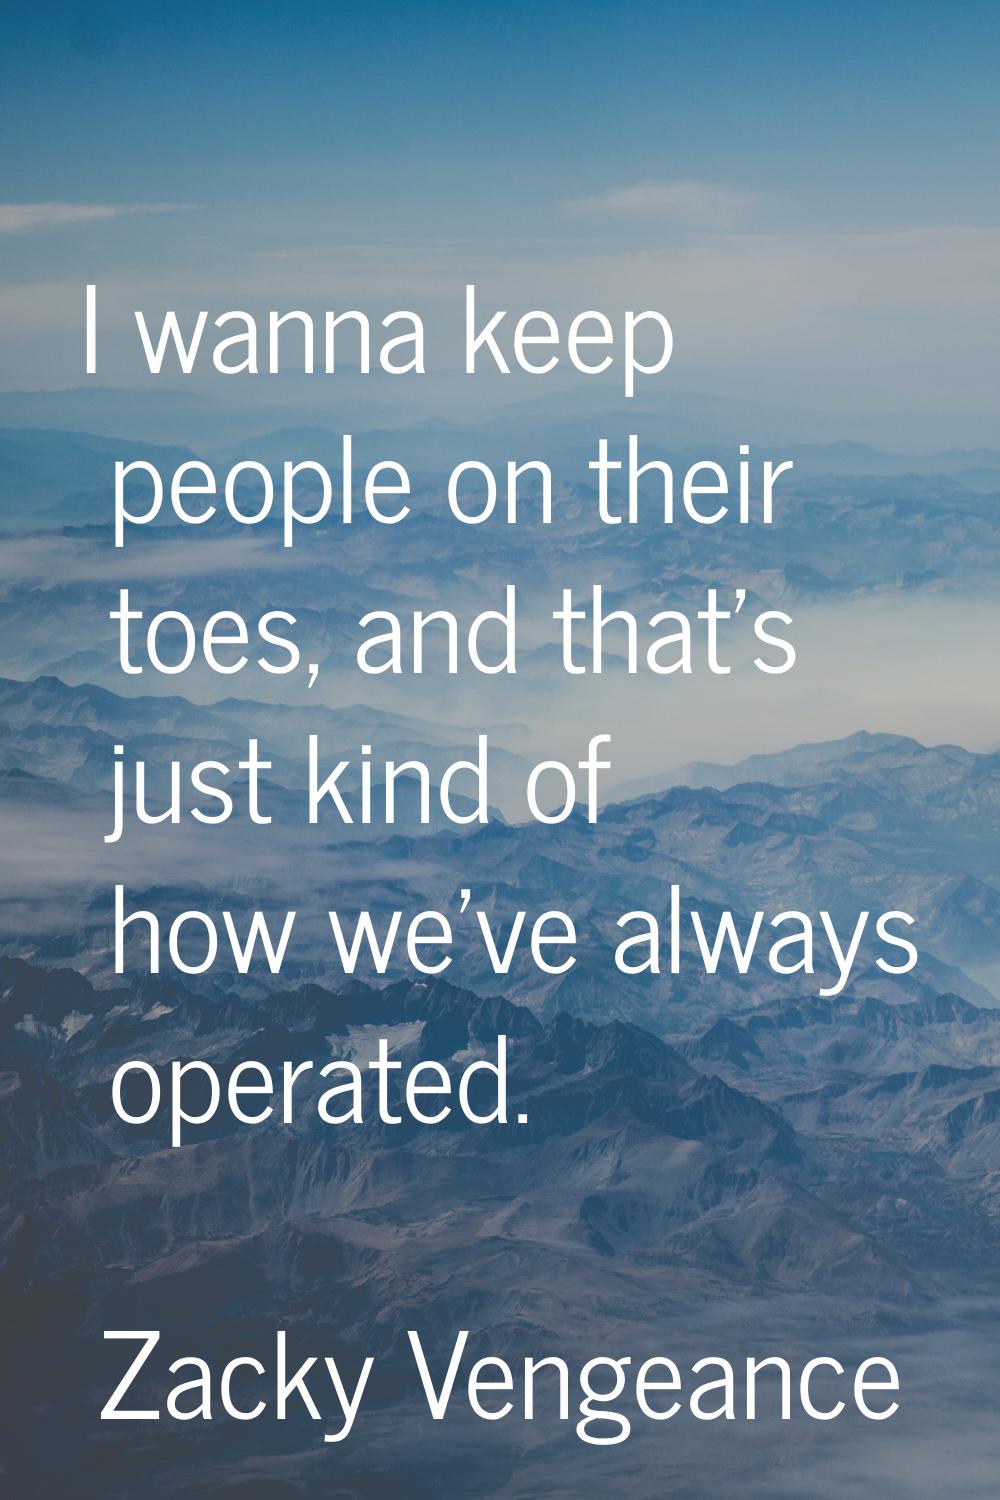 I wanna keep people on their toes, and that's just kind of how we've always operated.